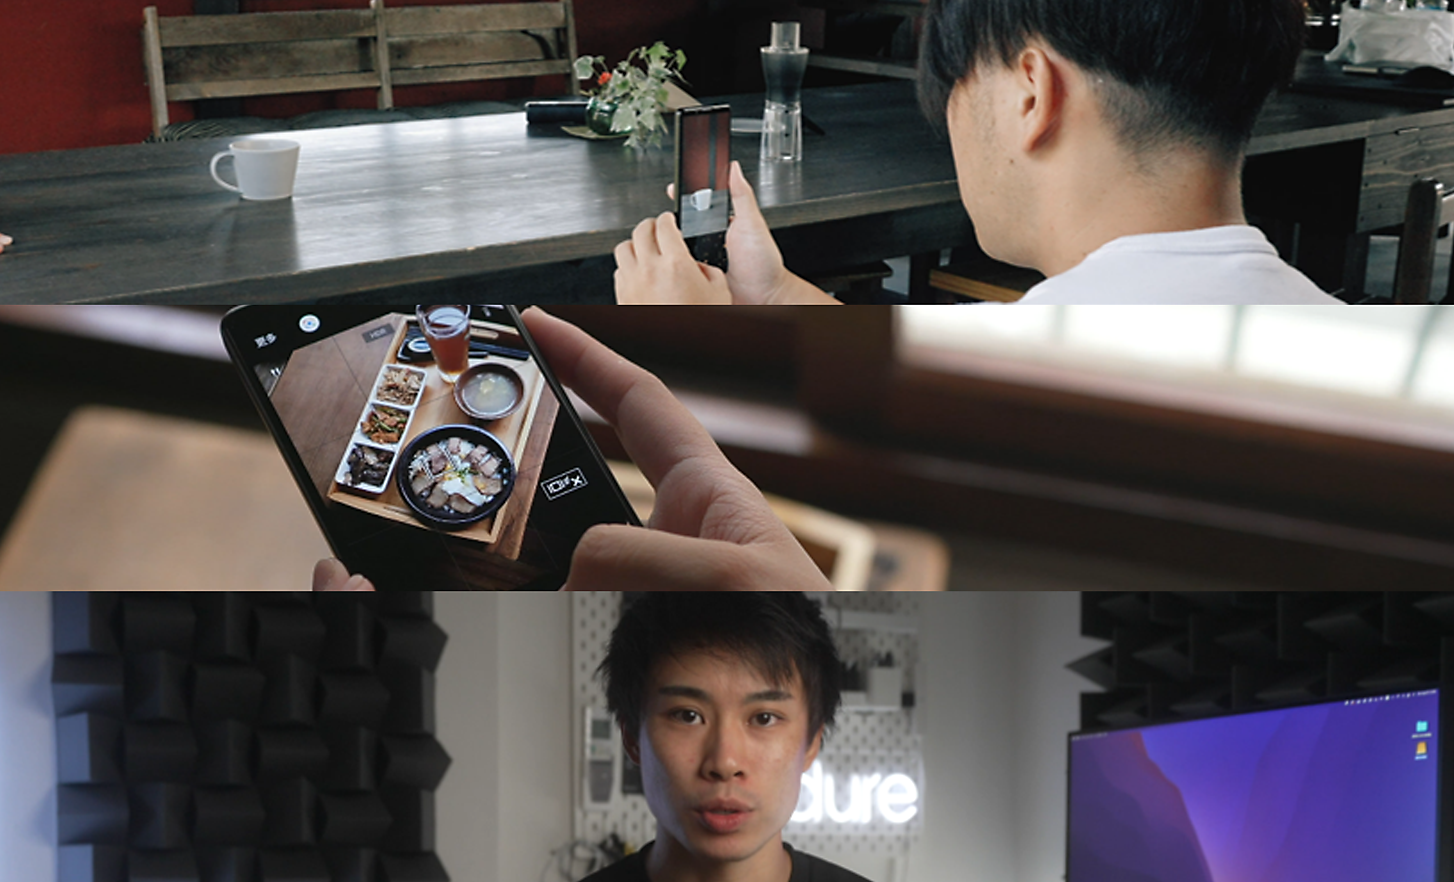 Three images: a man taking a photo with an Xperia, someone looking at an image on an Xperia, and a man looking directly at the camera